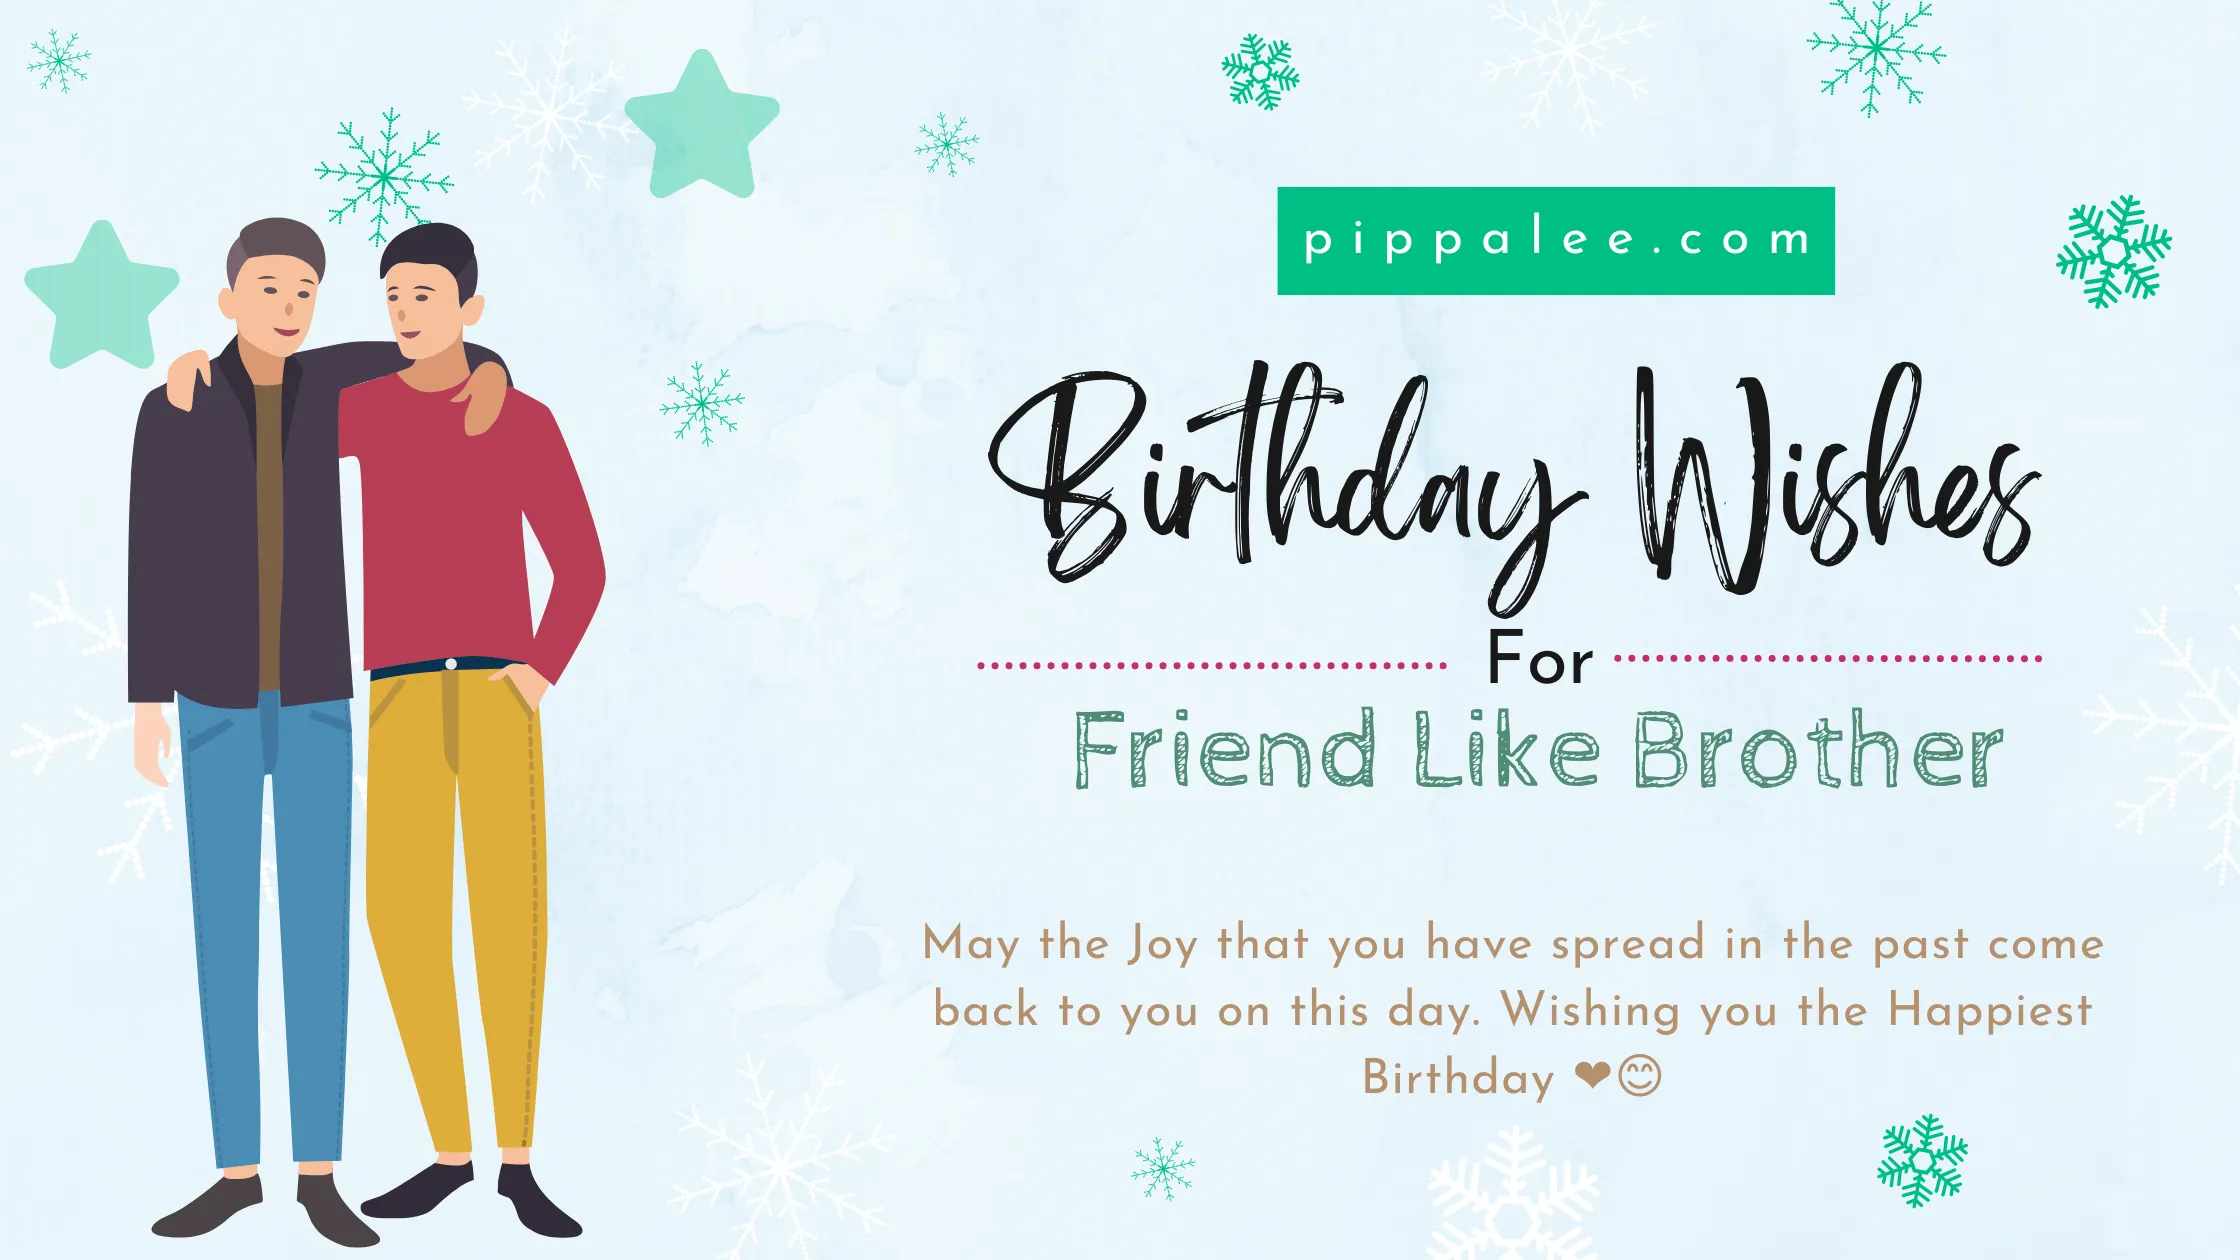 Birthday Wishes For Friend Like Brother - Wishes & Messages